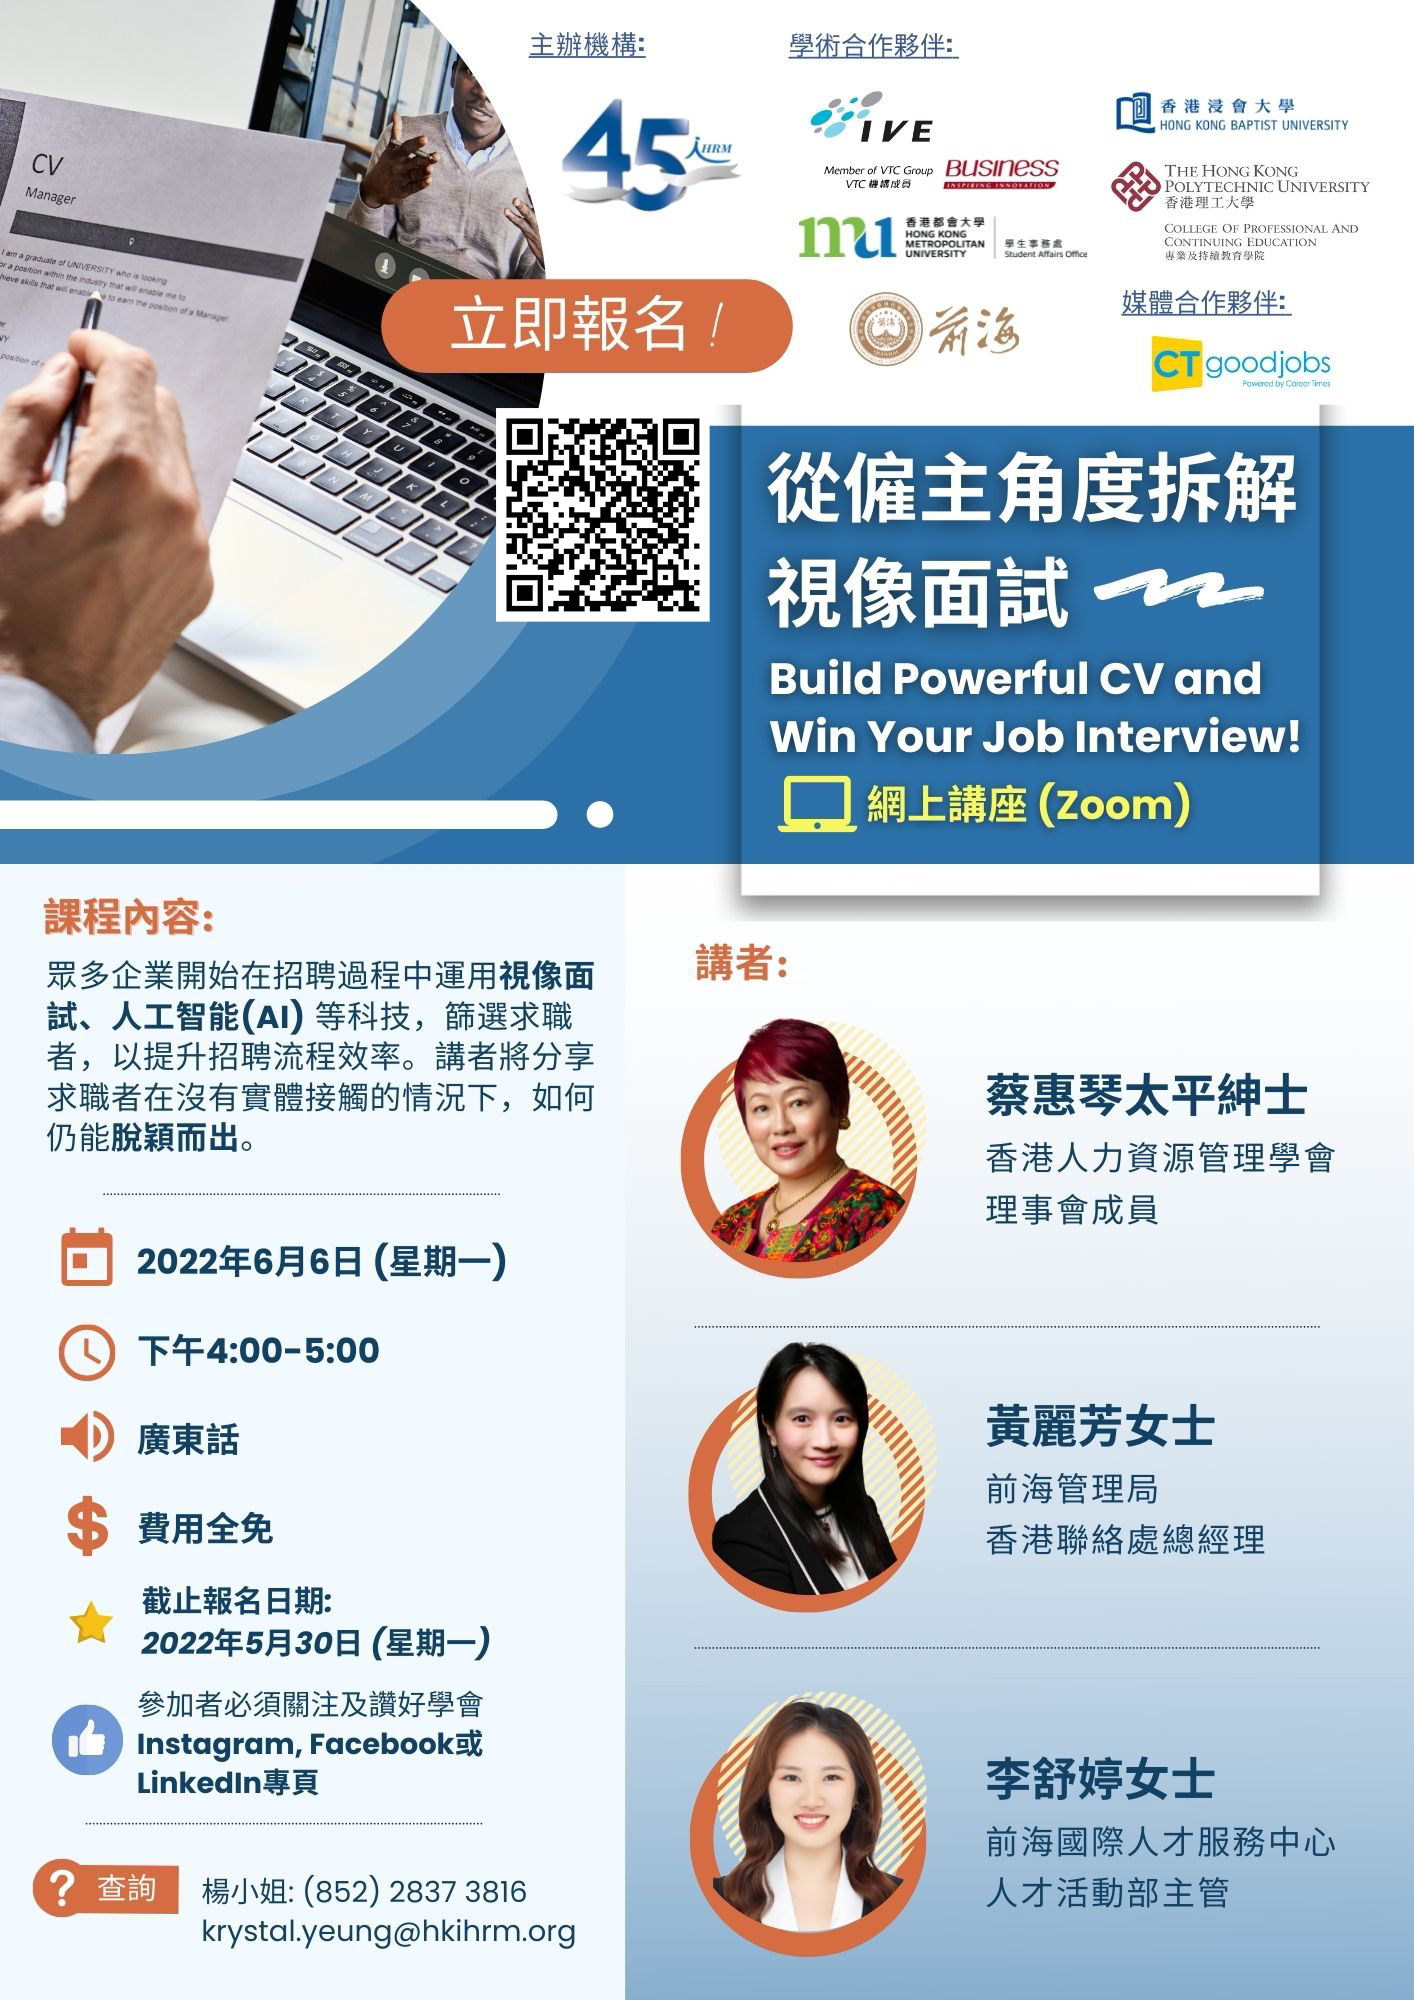 Build Powerful CV and Win Your Job Interview